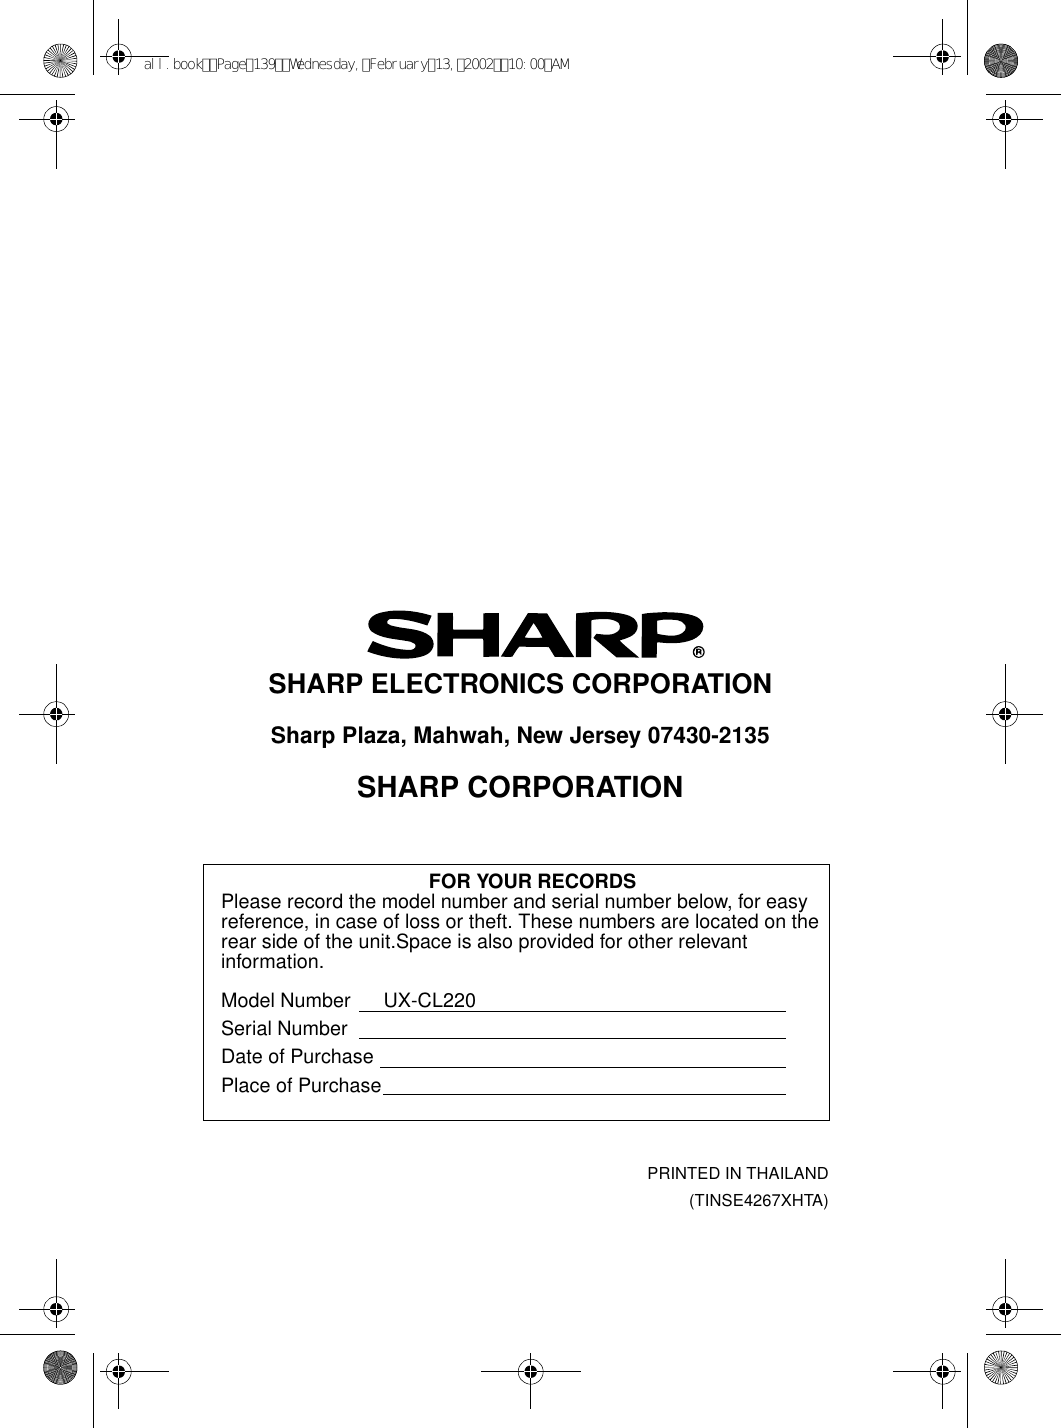 PRINTED IN THAILAND(TINSE4267XHTA)SHARP ELECTRONICS CORPORATIONSharp Plaza, Mahwah, New Jersey 07430-2135SHARP CORPORATIONFOR YOUR RECORDSPlease record the model number and serial number below, for easy reference, in case of loss or theft. These numbers are located on the rear side of the unit.Space is also provided for other relevant information.Model Number      UX-CL220Serial NumberDate of PurchasePlace of Purchaseall.bookPage139Wednesday,February13,200210:00AM